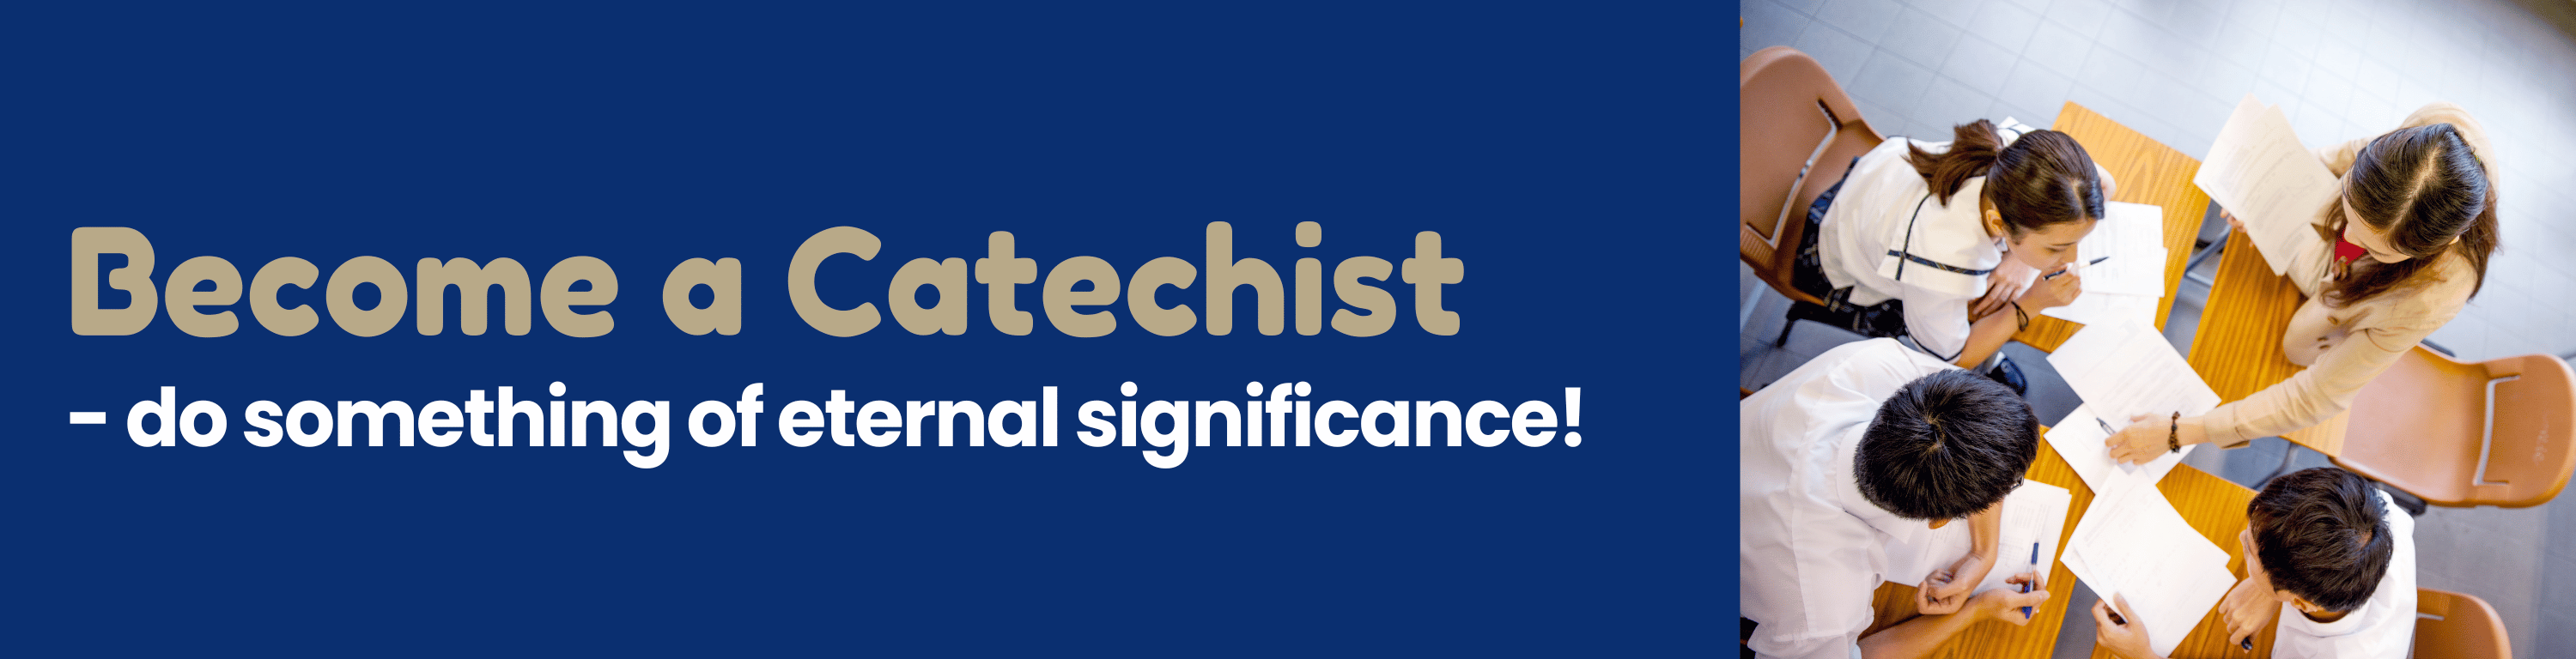 Become a Catechist – do something of eternal significance!